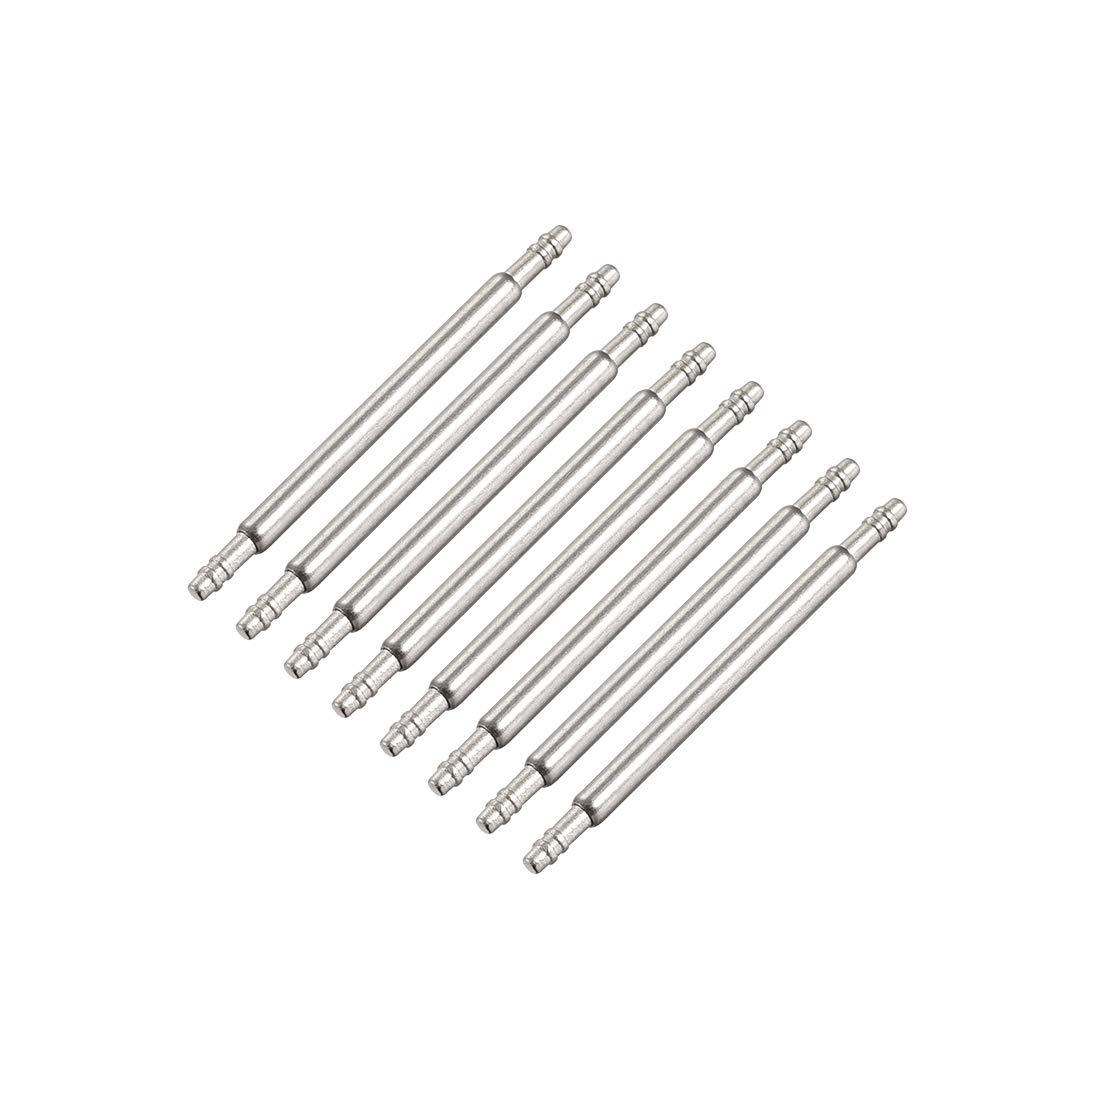 uxcell Spring Bar Pins - 19mm x 1.5mm x 0.8mm Double Fringe Stainless Steel Watch Band Pins Replacement Watch Lug Link Pins 8Pcs